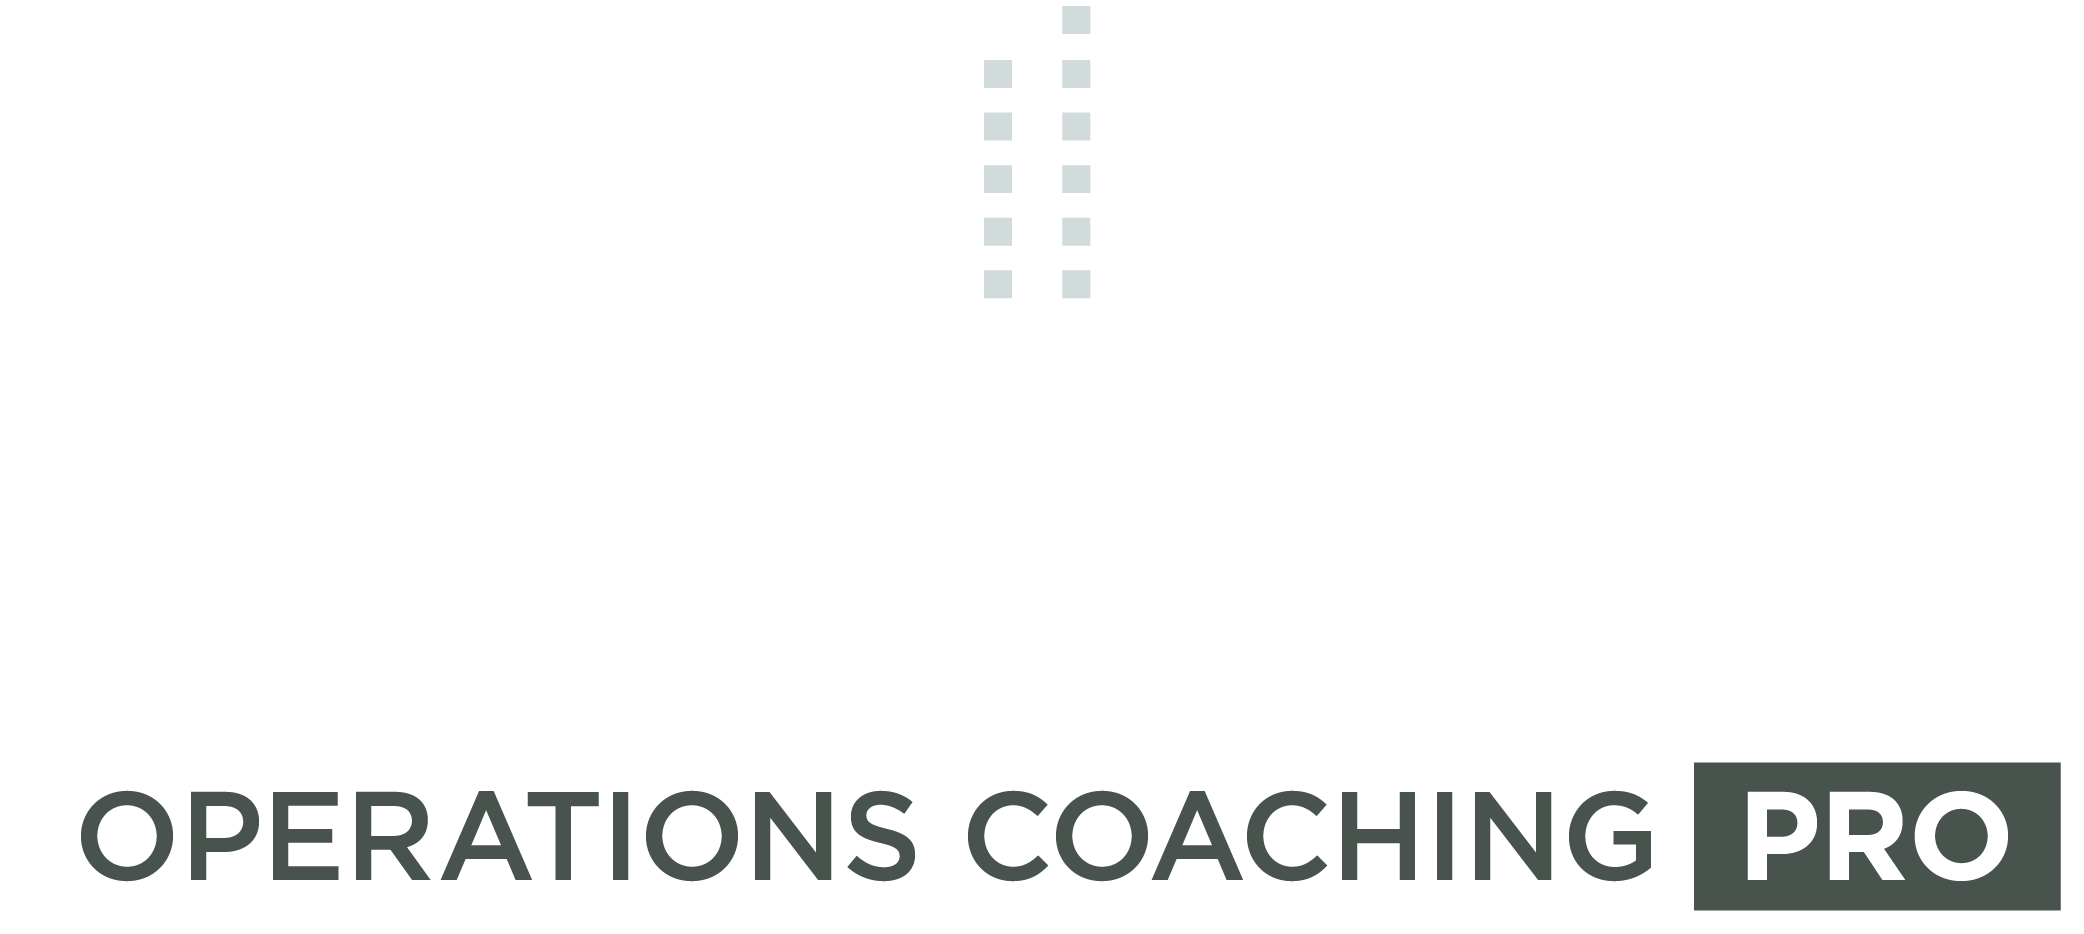 Amplified Solutions Operations Coaching Pro